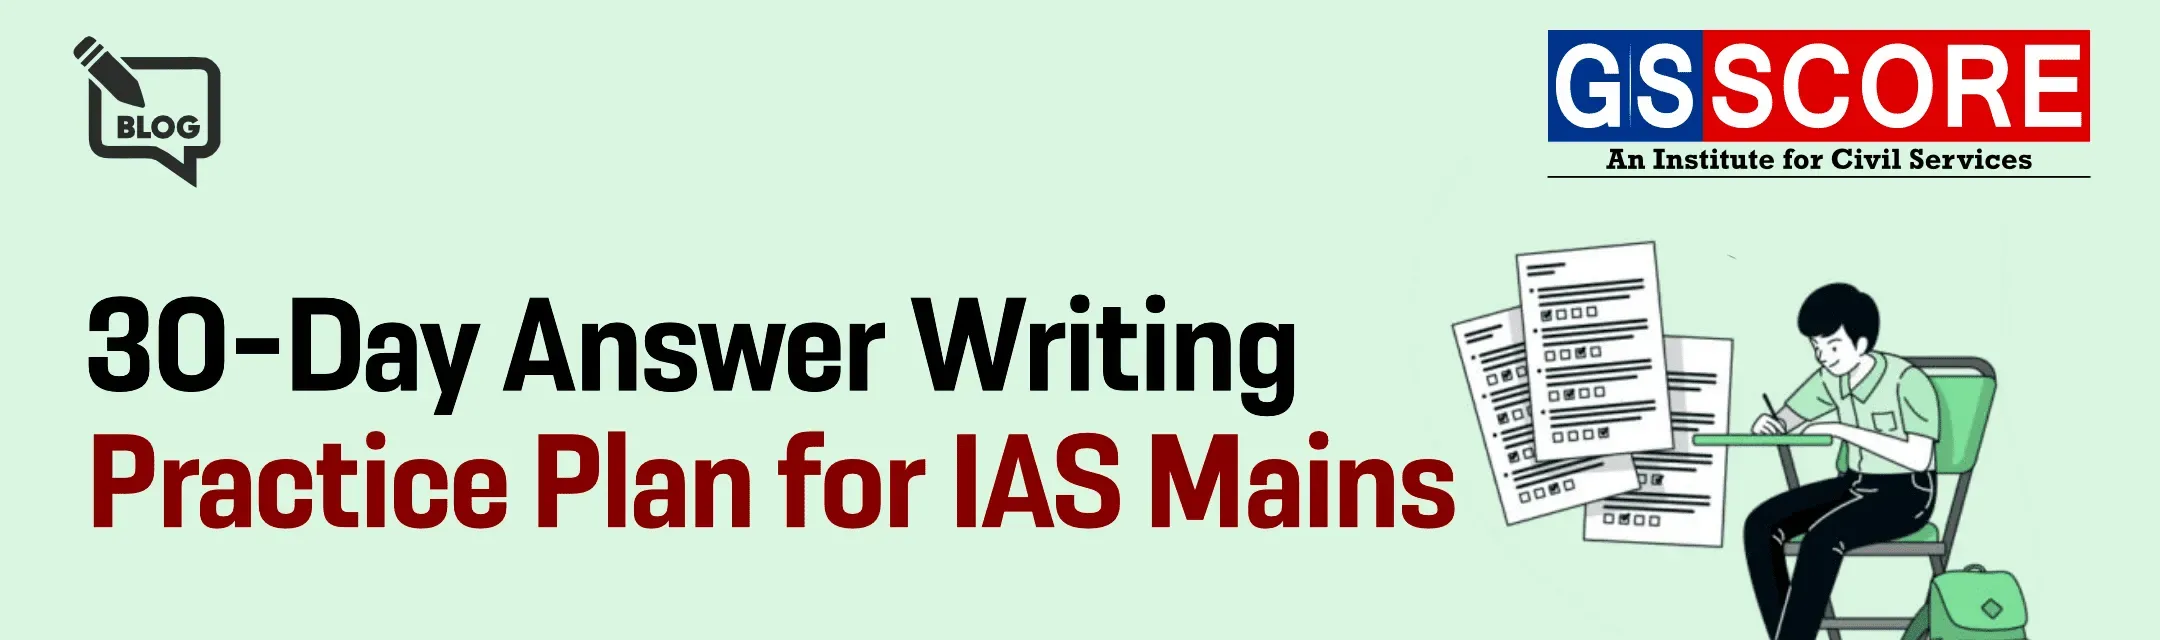 30-Day Answer Writing Practice Plan for IAS Mains